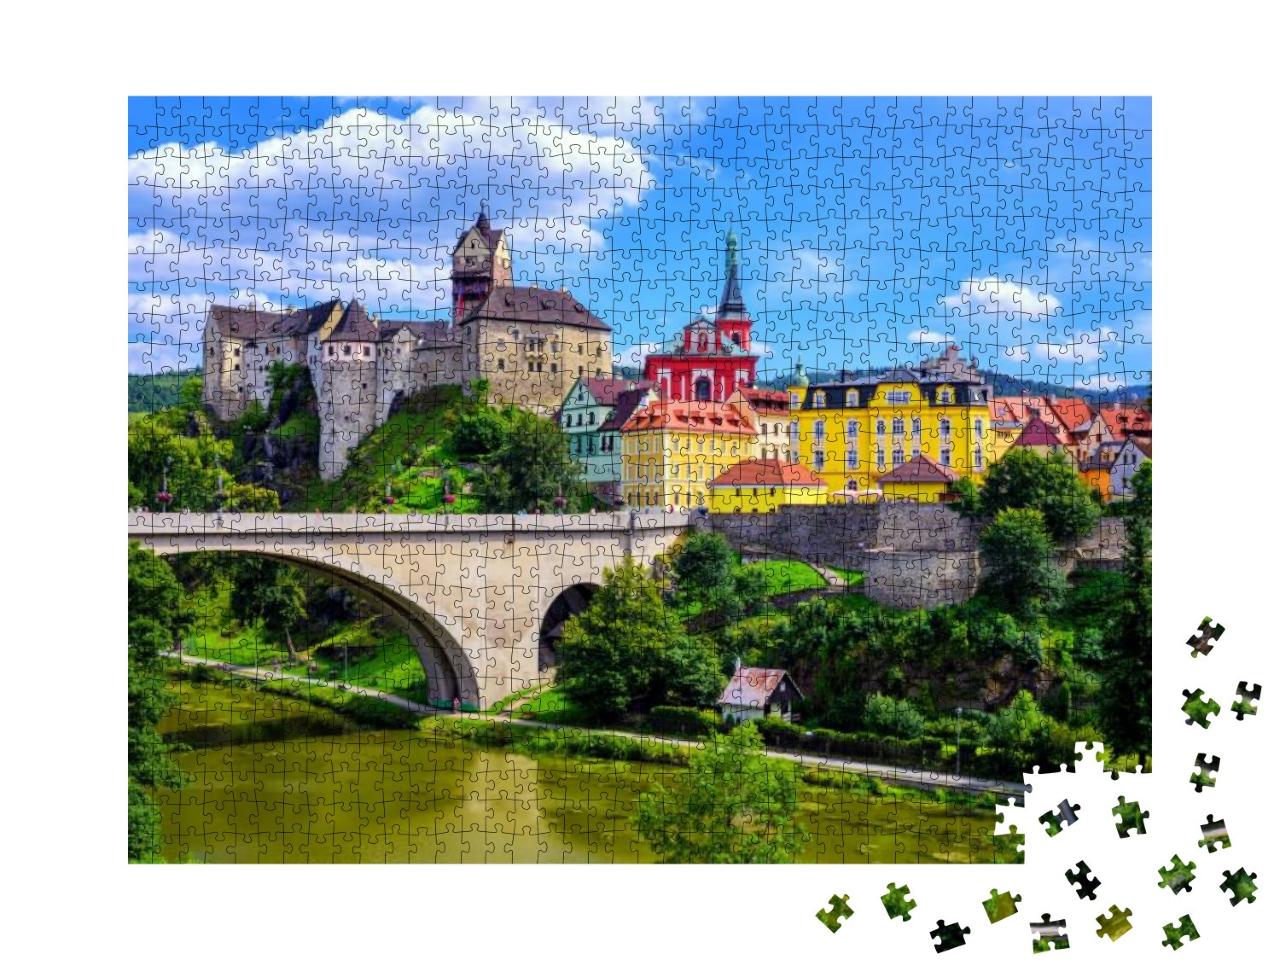 Colorful Town & Castle Loket Over Eger River in the Near... Jigsaw Puzzle with 1000 pieces